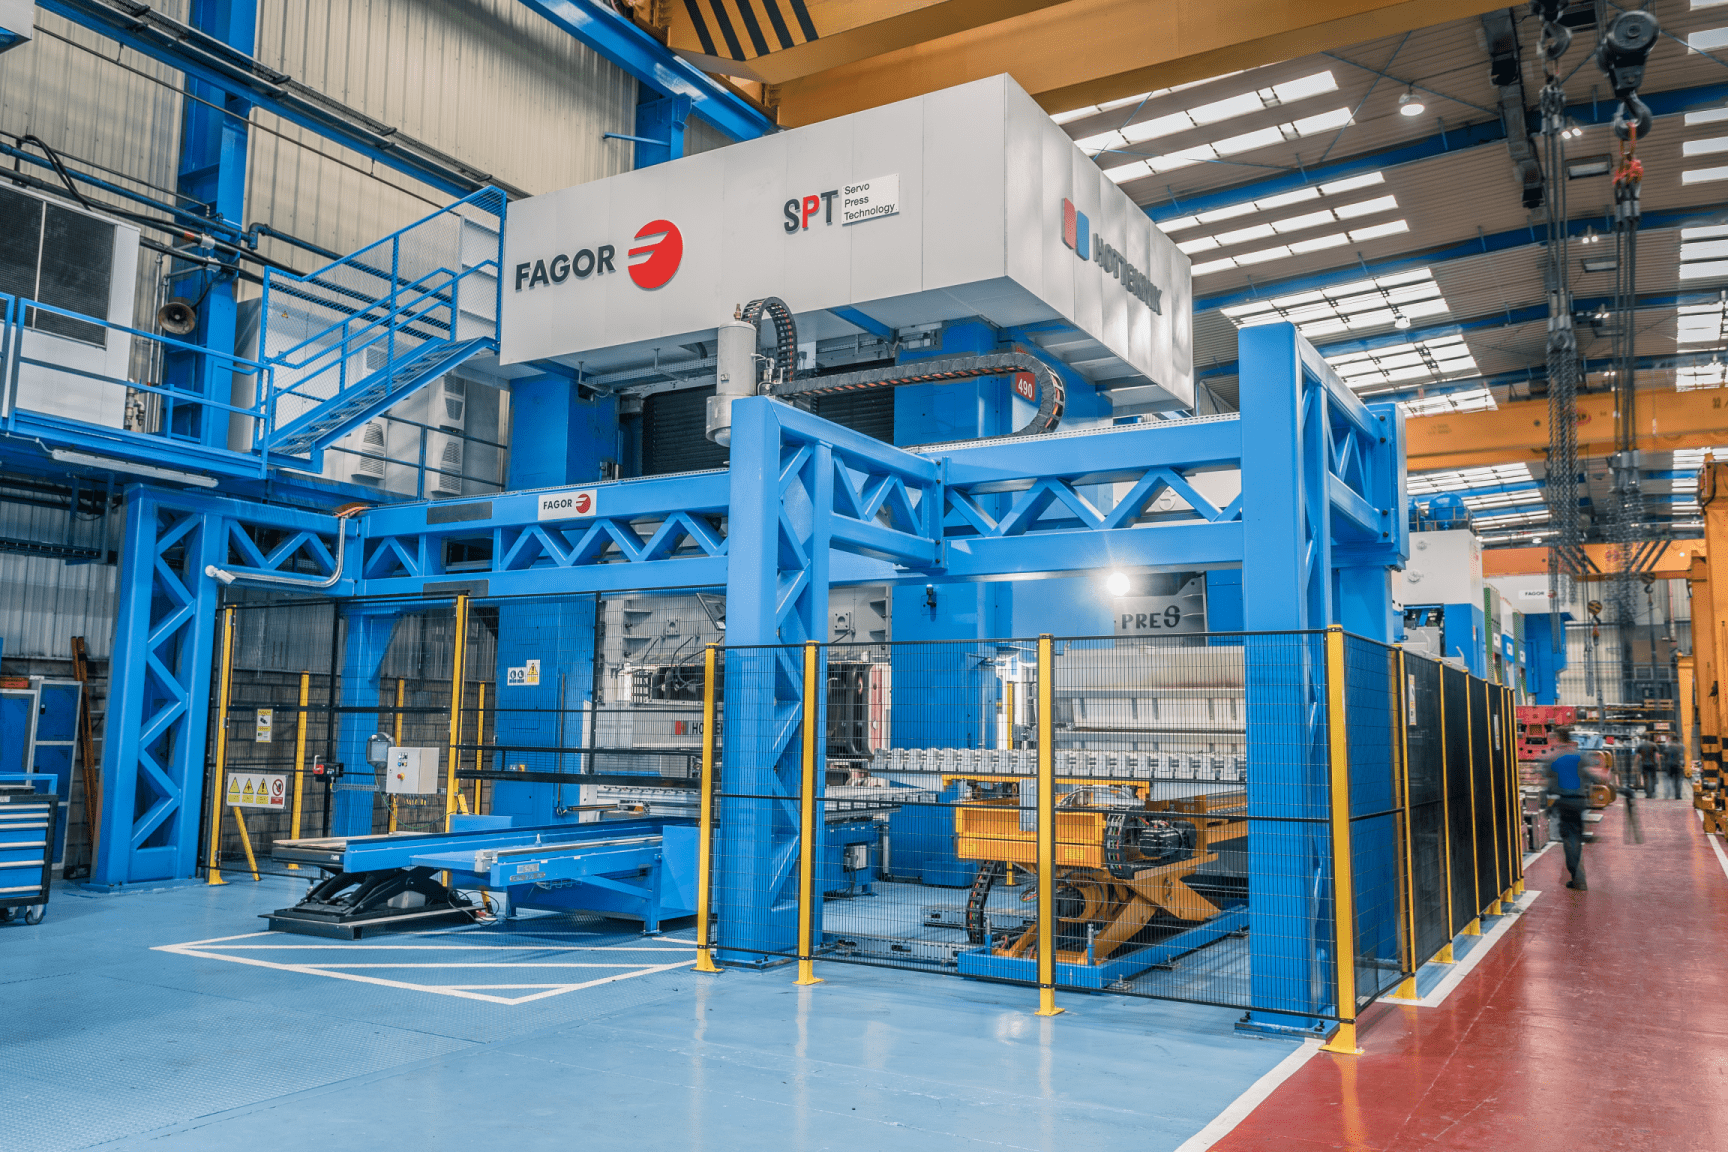 Fagor Arrasate event: IMPRESSION TECHNOLOGIES AND FAGOR ARRASATE PARTNER TO PROVIDE HIGH VOLUME ALUMINIUM HOT FORM QUENCH PRODUCTION LINE SOLUTIONS TO THE GLOBAL AUTOMOTIVE MARKET